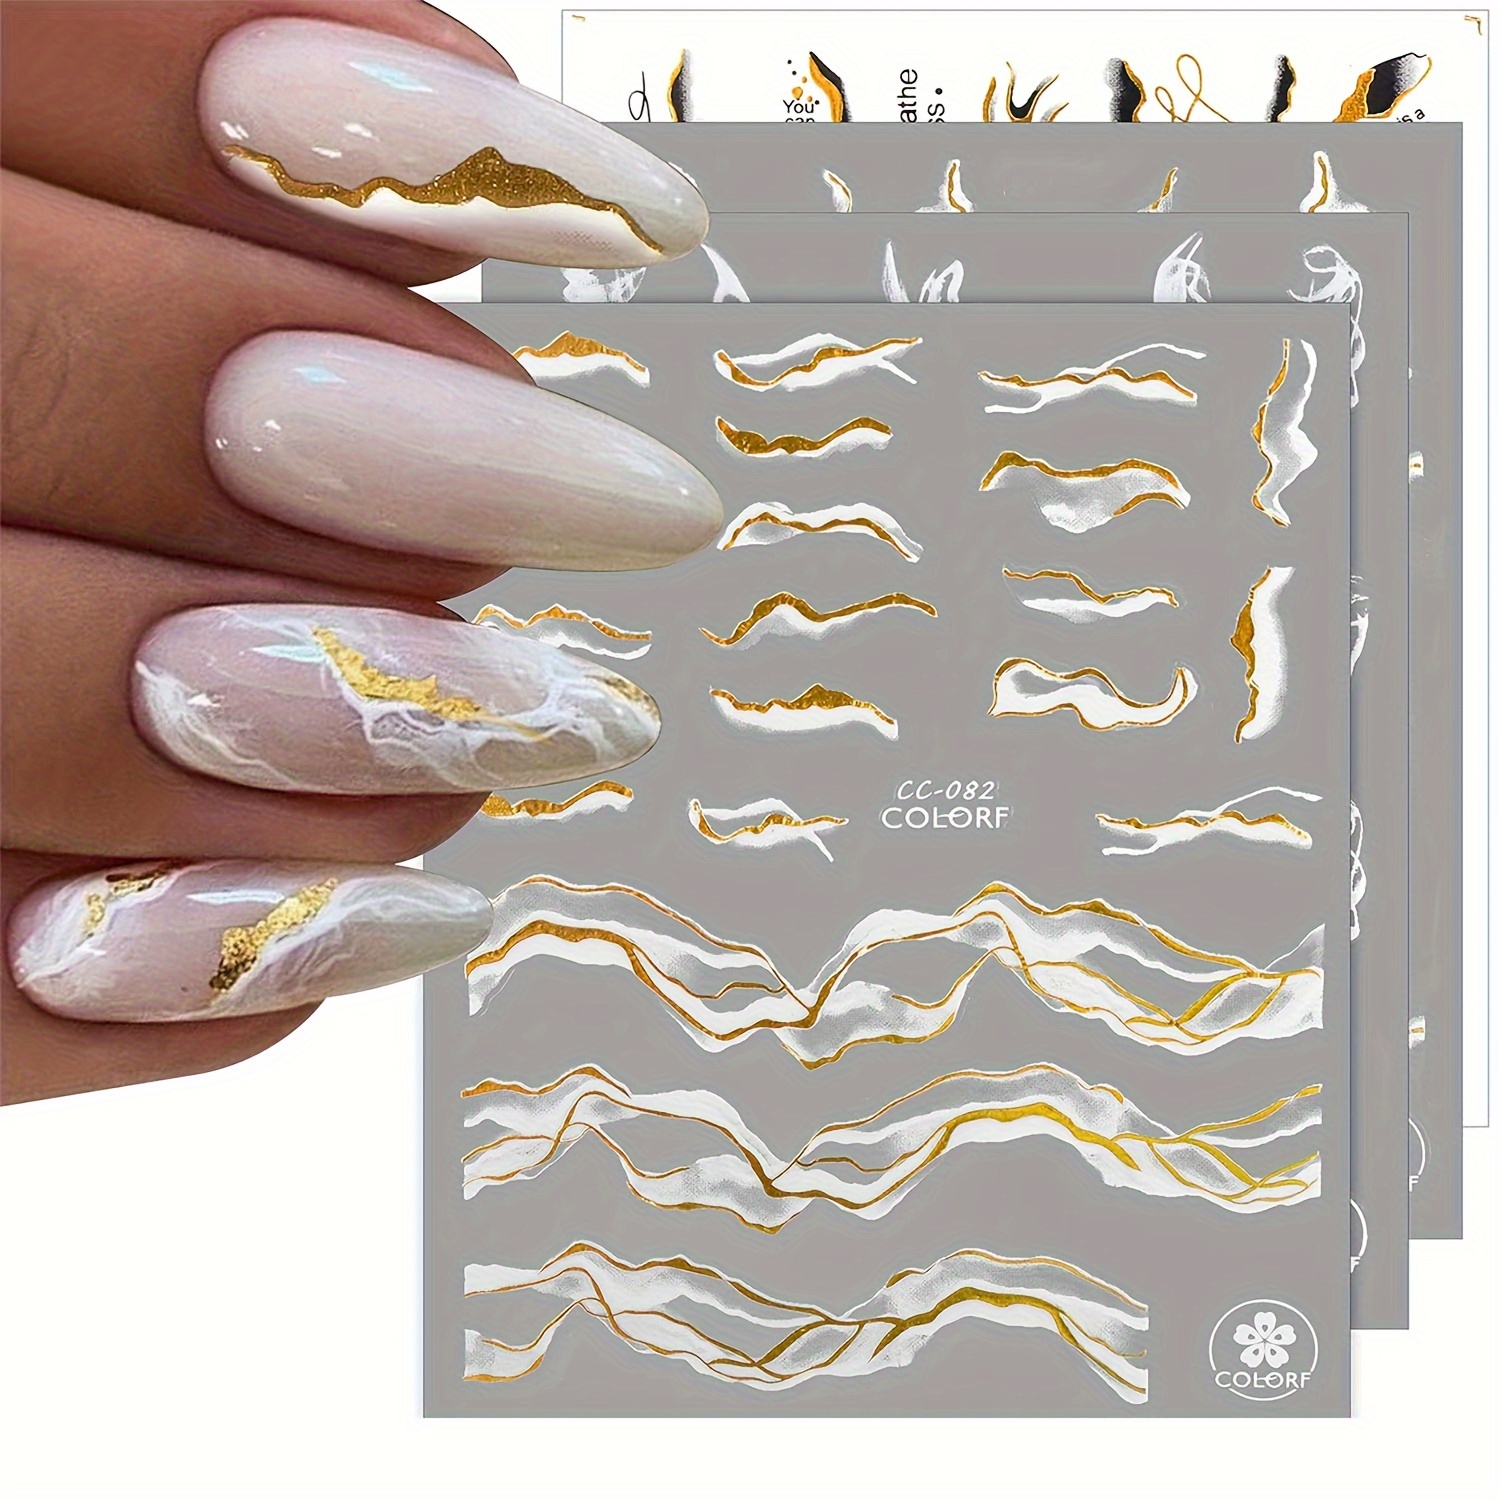 

12 Sheet Marble Design Nail Art Stickers, Self Adhesive Wave Design Nail Art Decals For Nail Art Decoration, Nail Art Supplies For Women And Girls